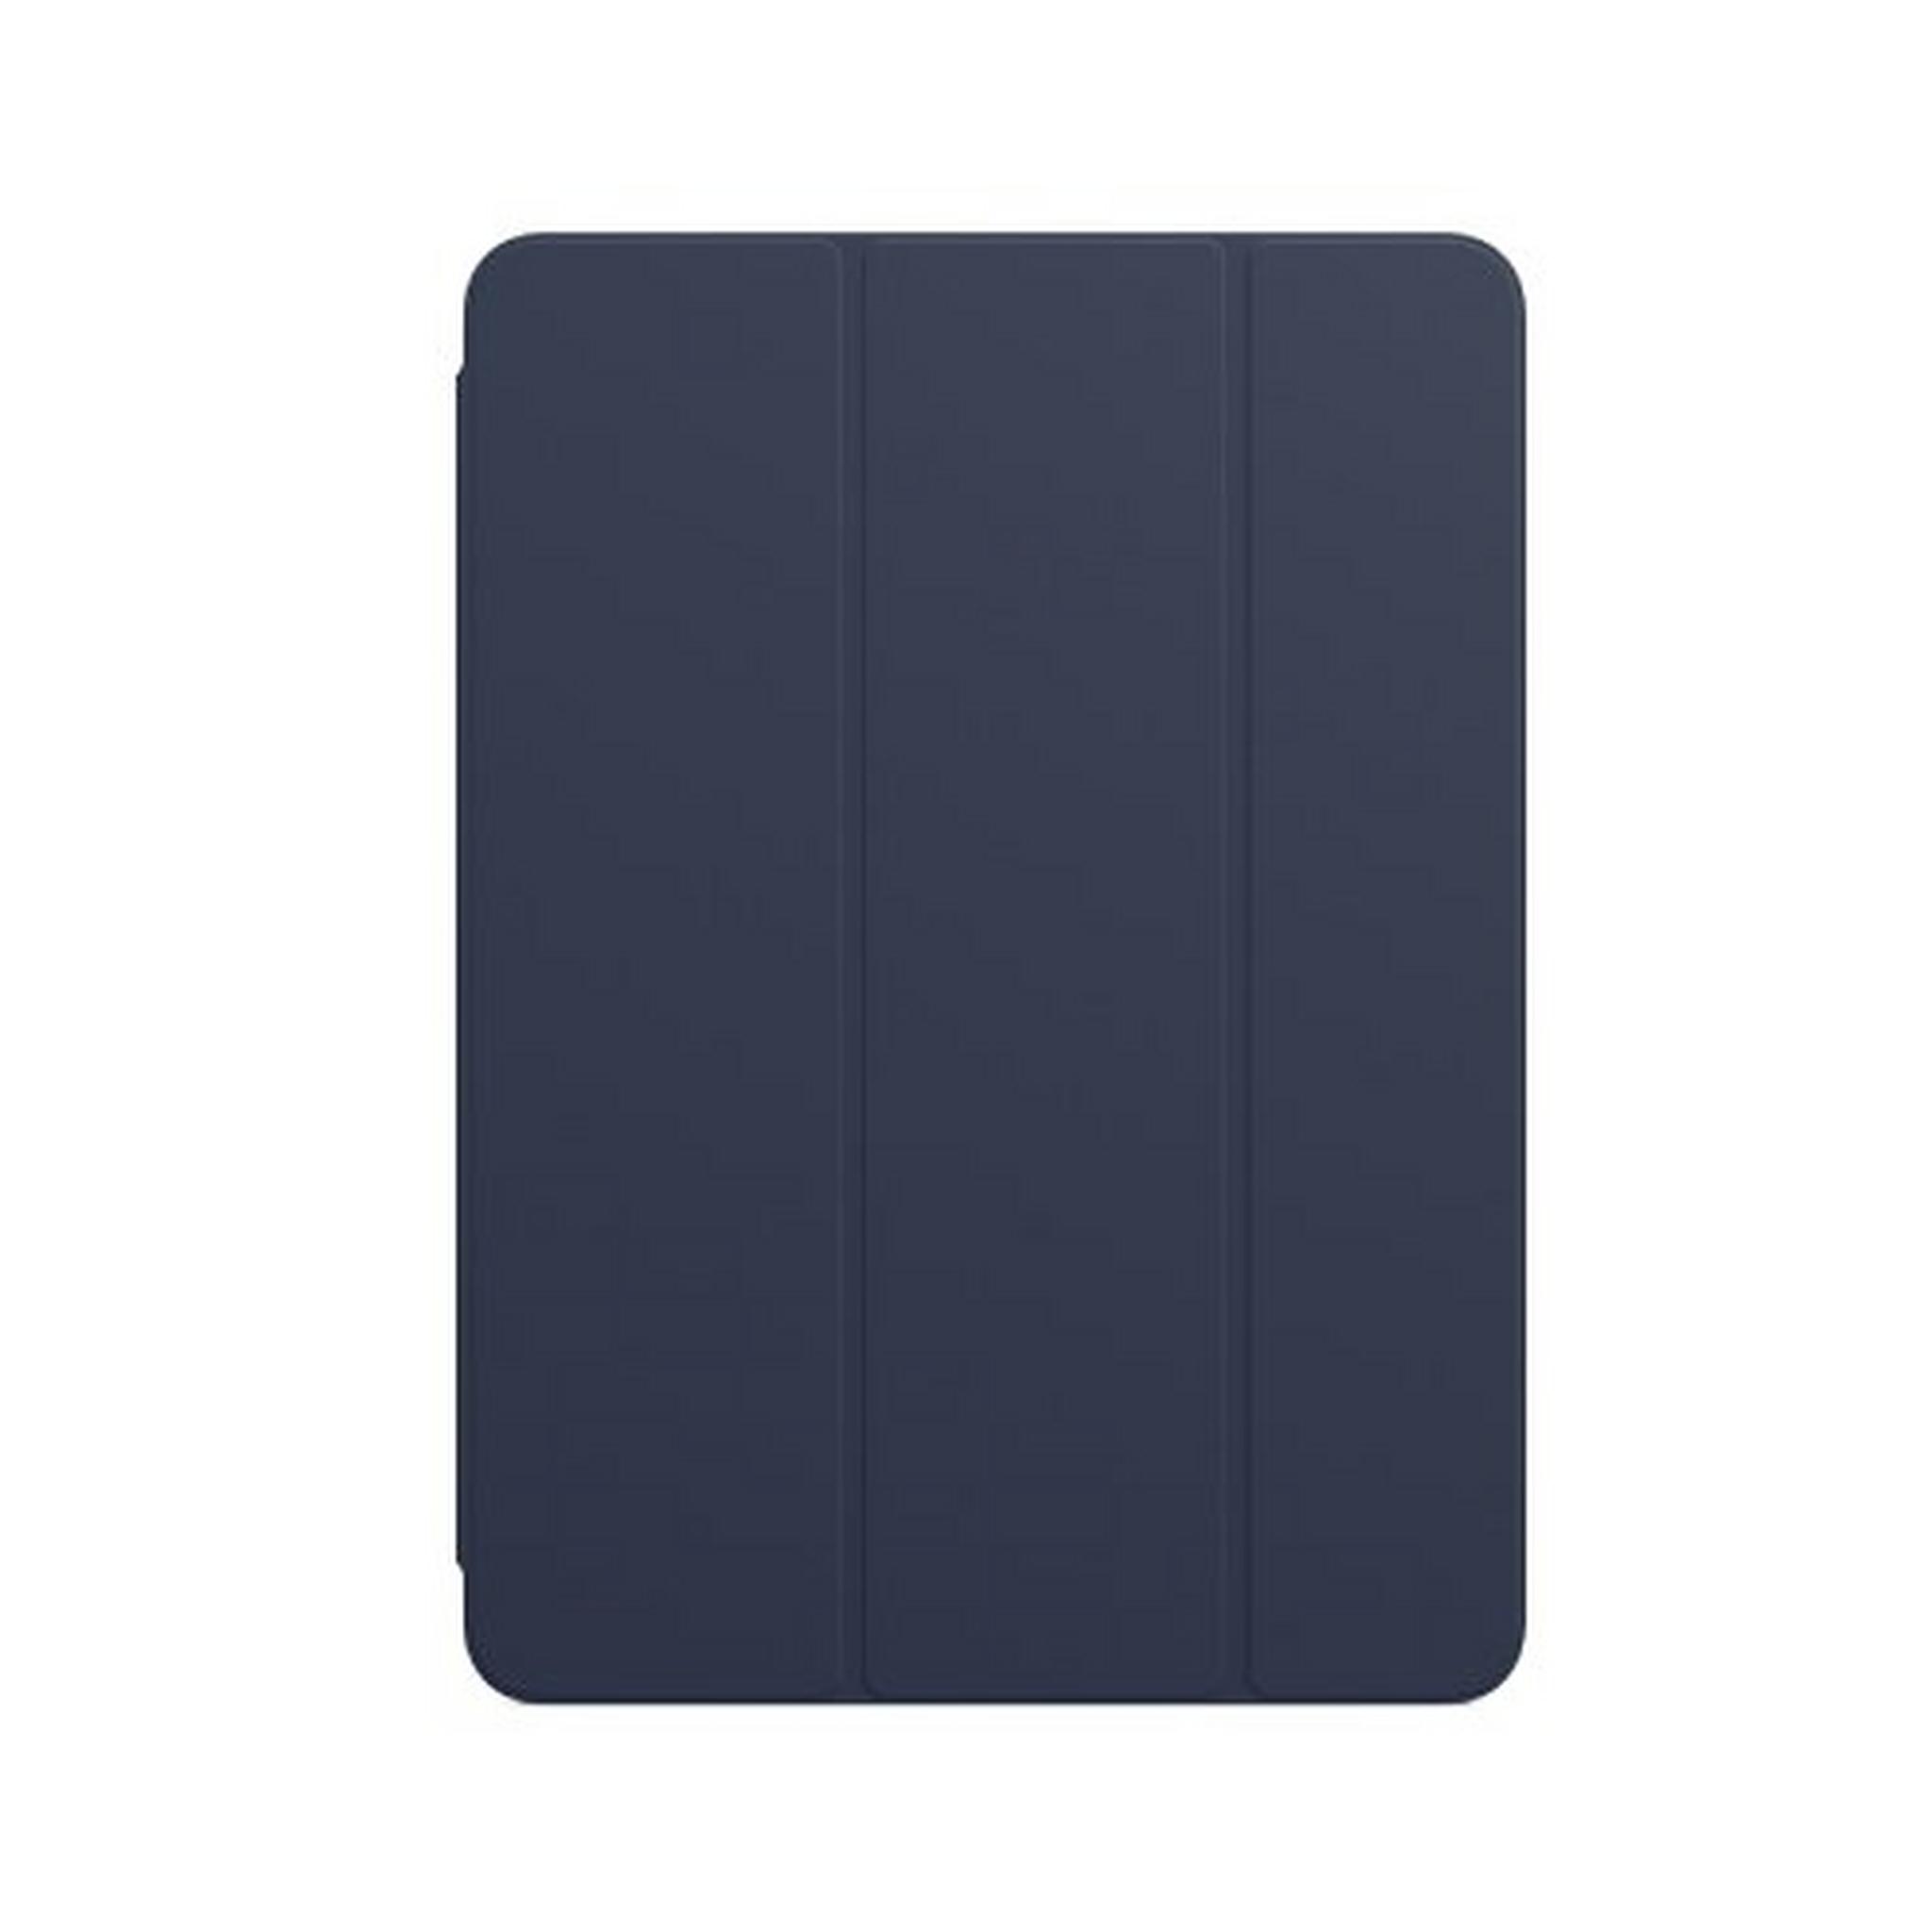 Apple Smart Folio Cover for iPad Air 4th Gen - Navy